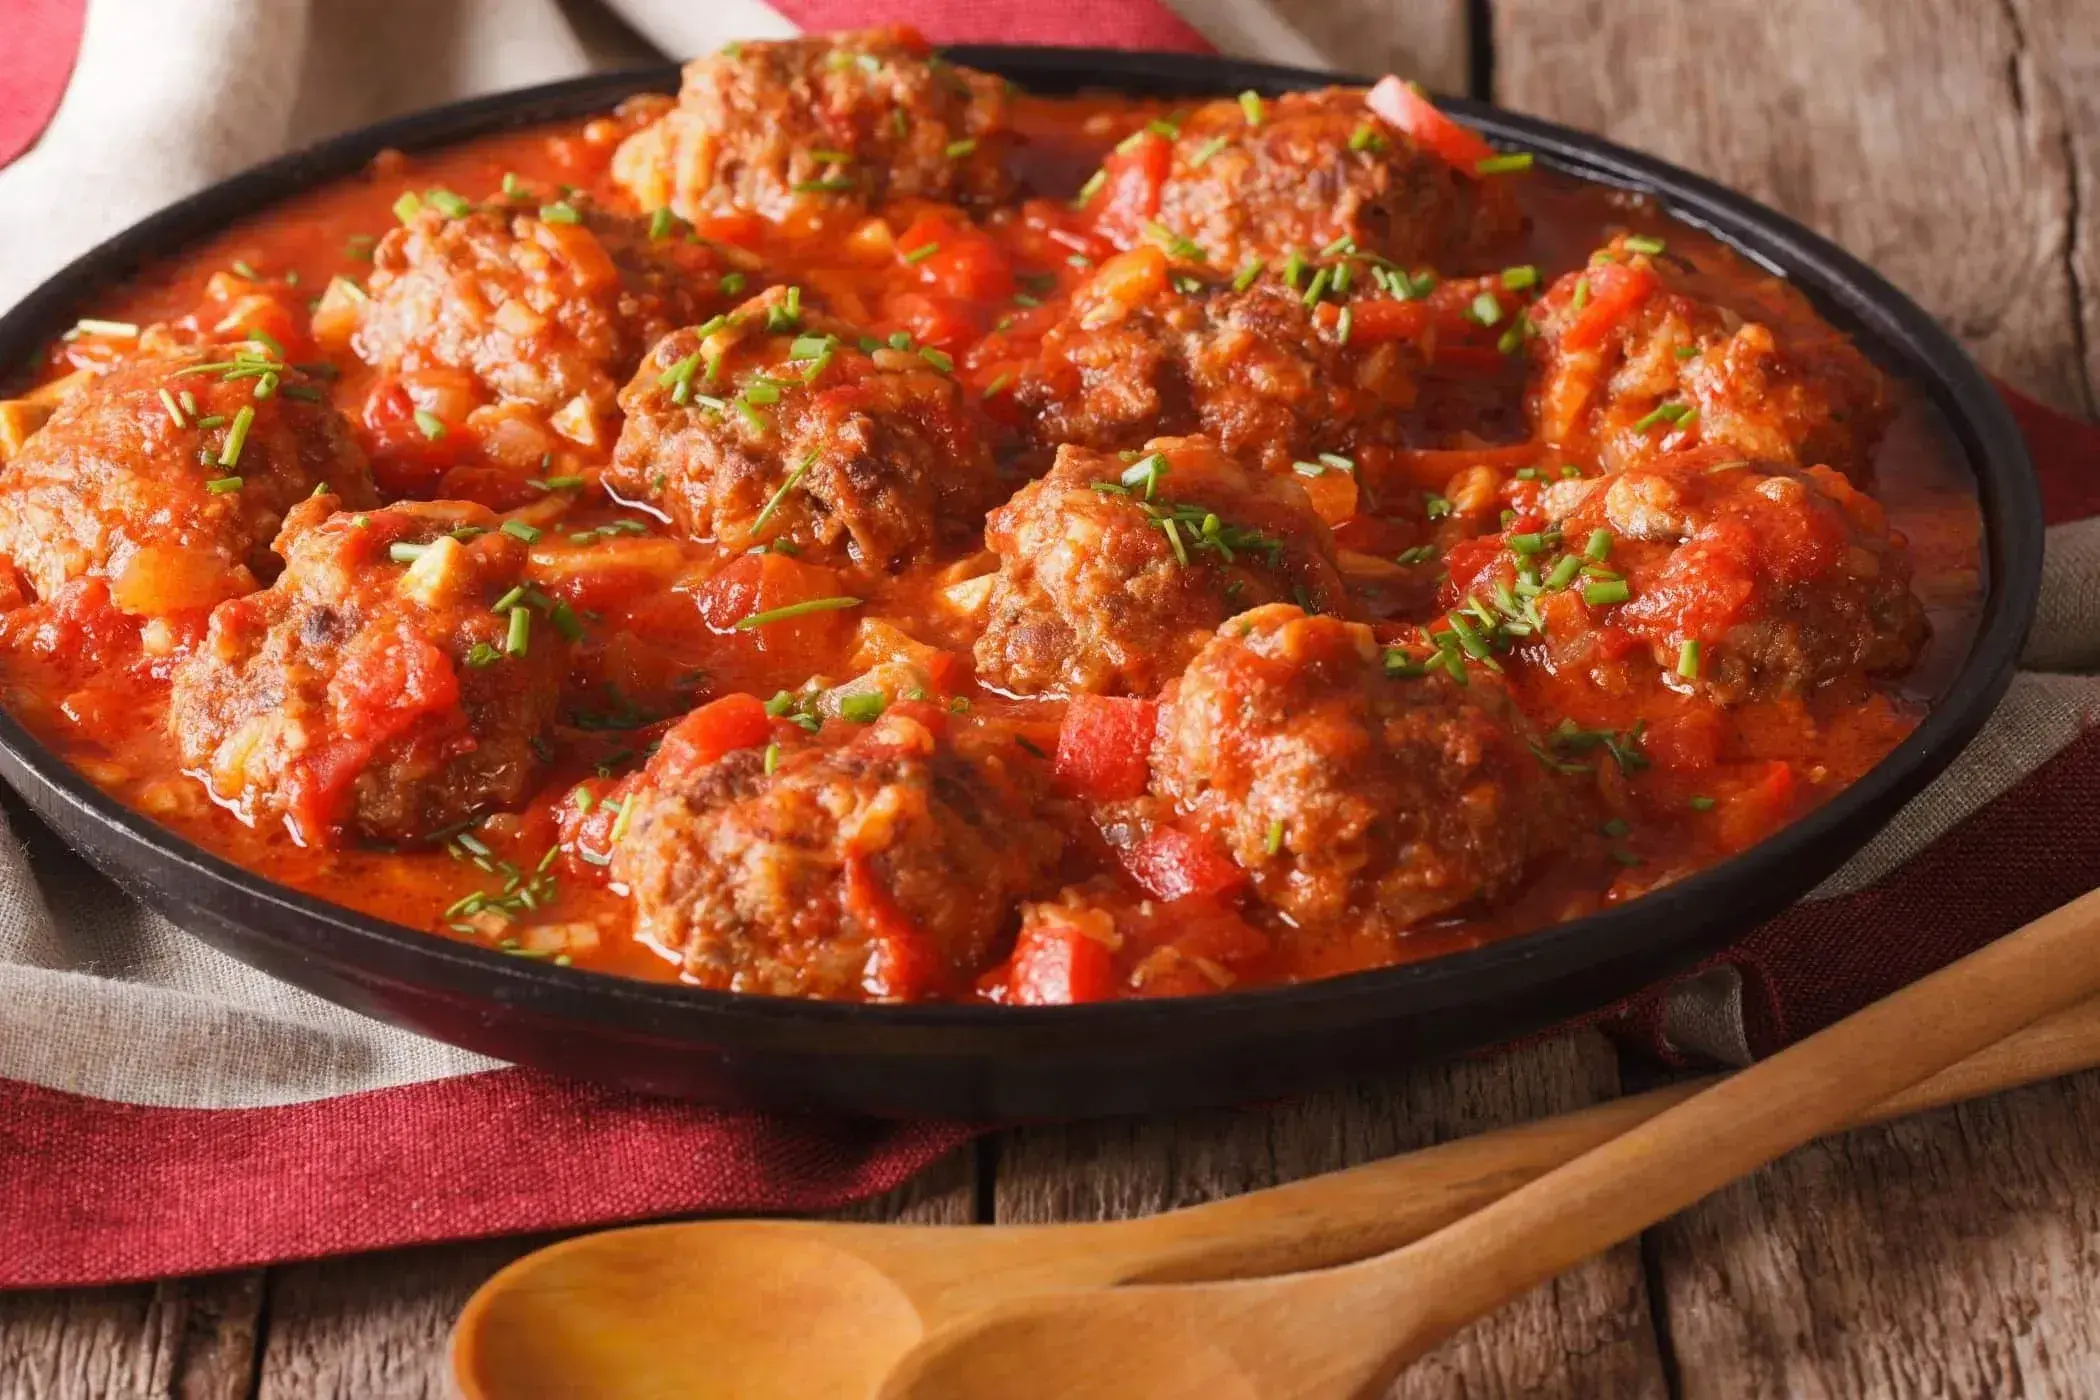 Chiftele: Meatballs in Tomato Sauceimage